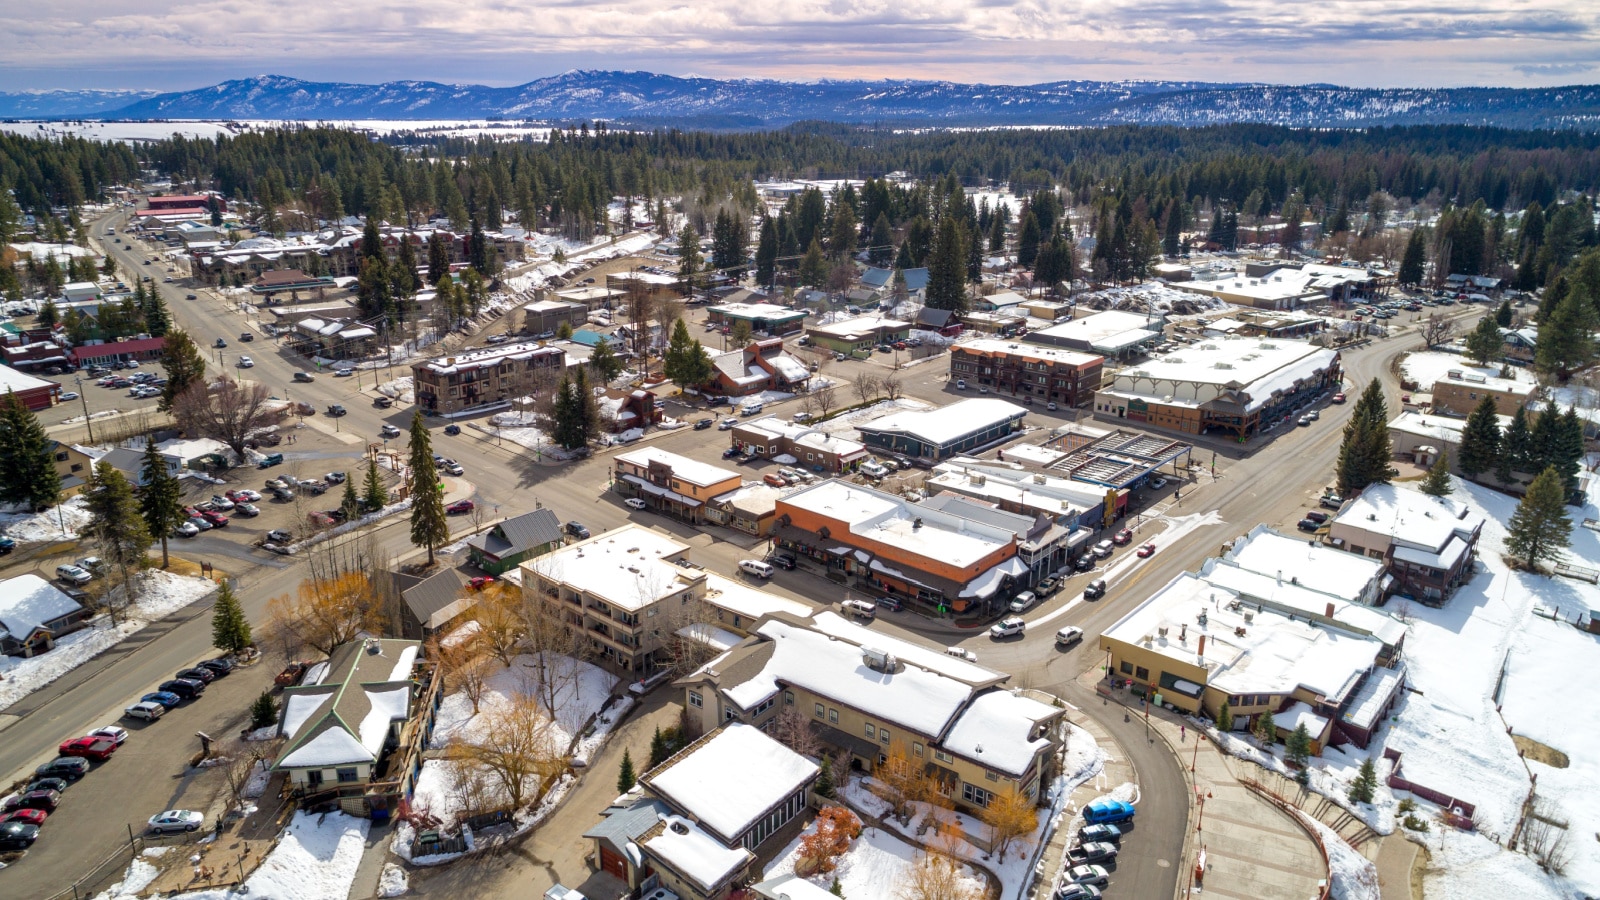 Little mountain town of McCall Idaho in winter with cars driving on the streets